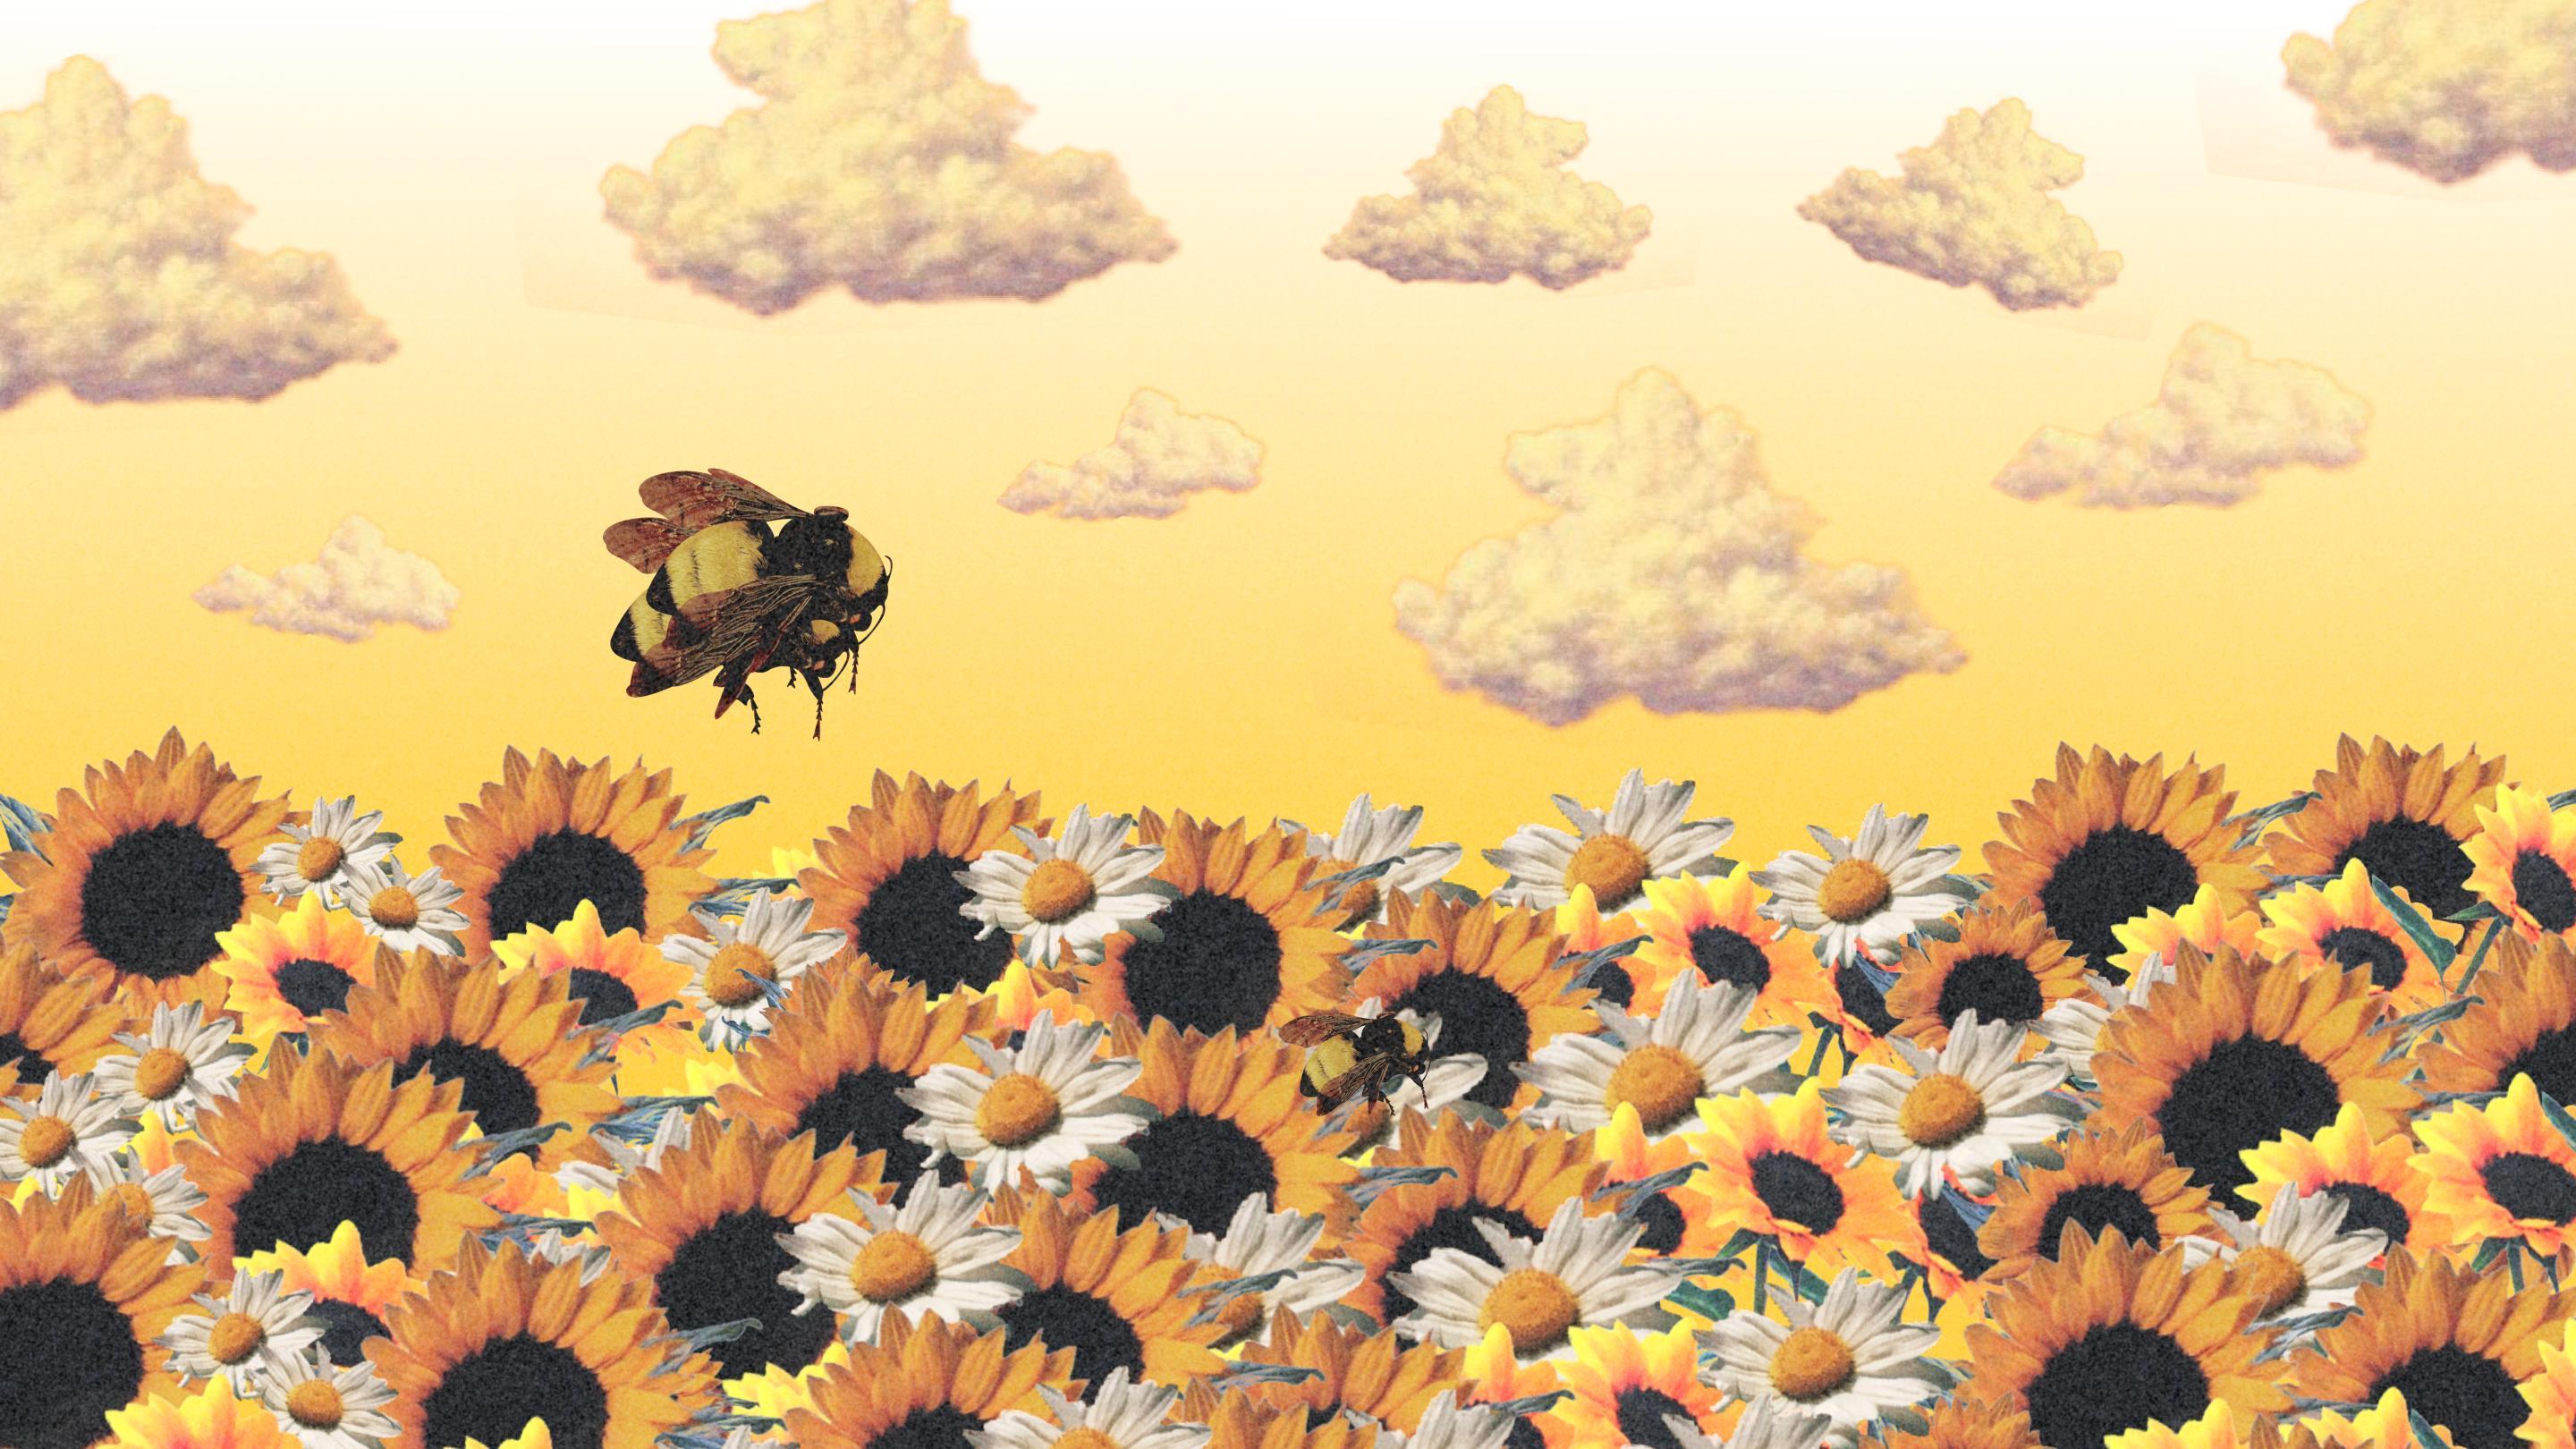 Simplistic Flower Boy Wallpaper 1920x1080 Not much but thought Id share  it if anyone wants it  rtylerthecreator